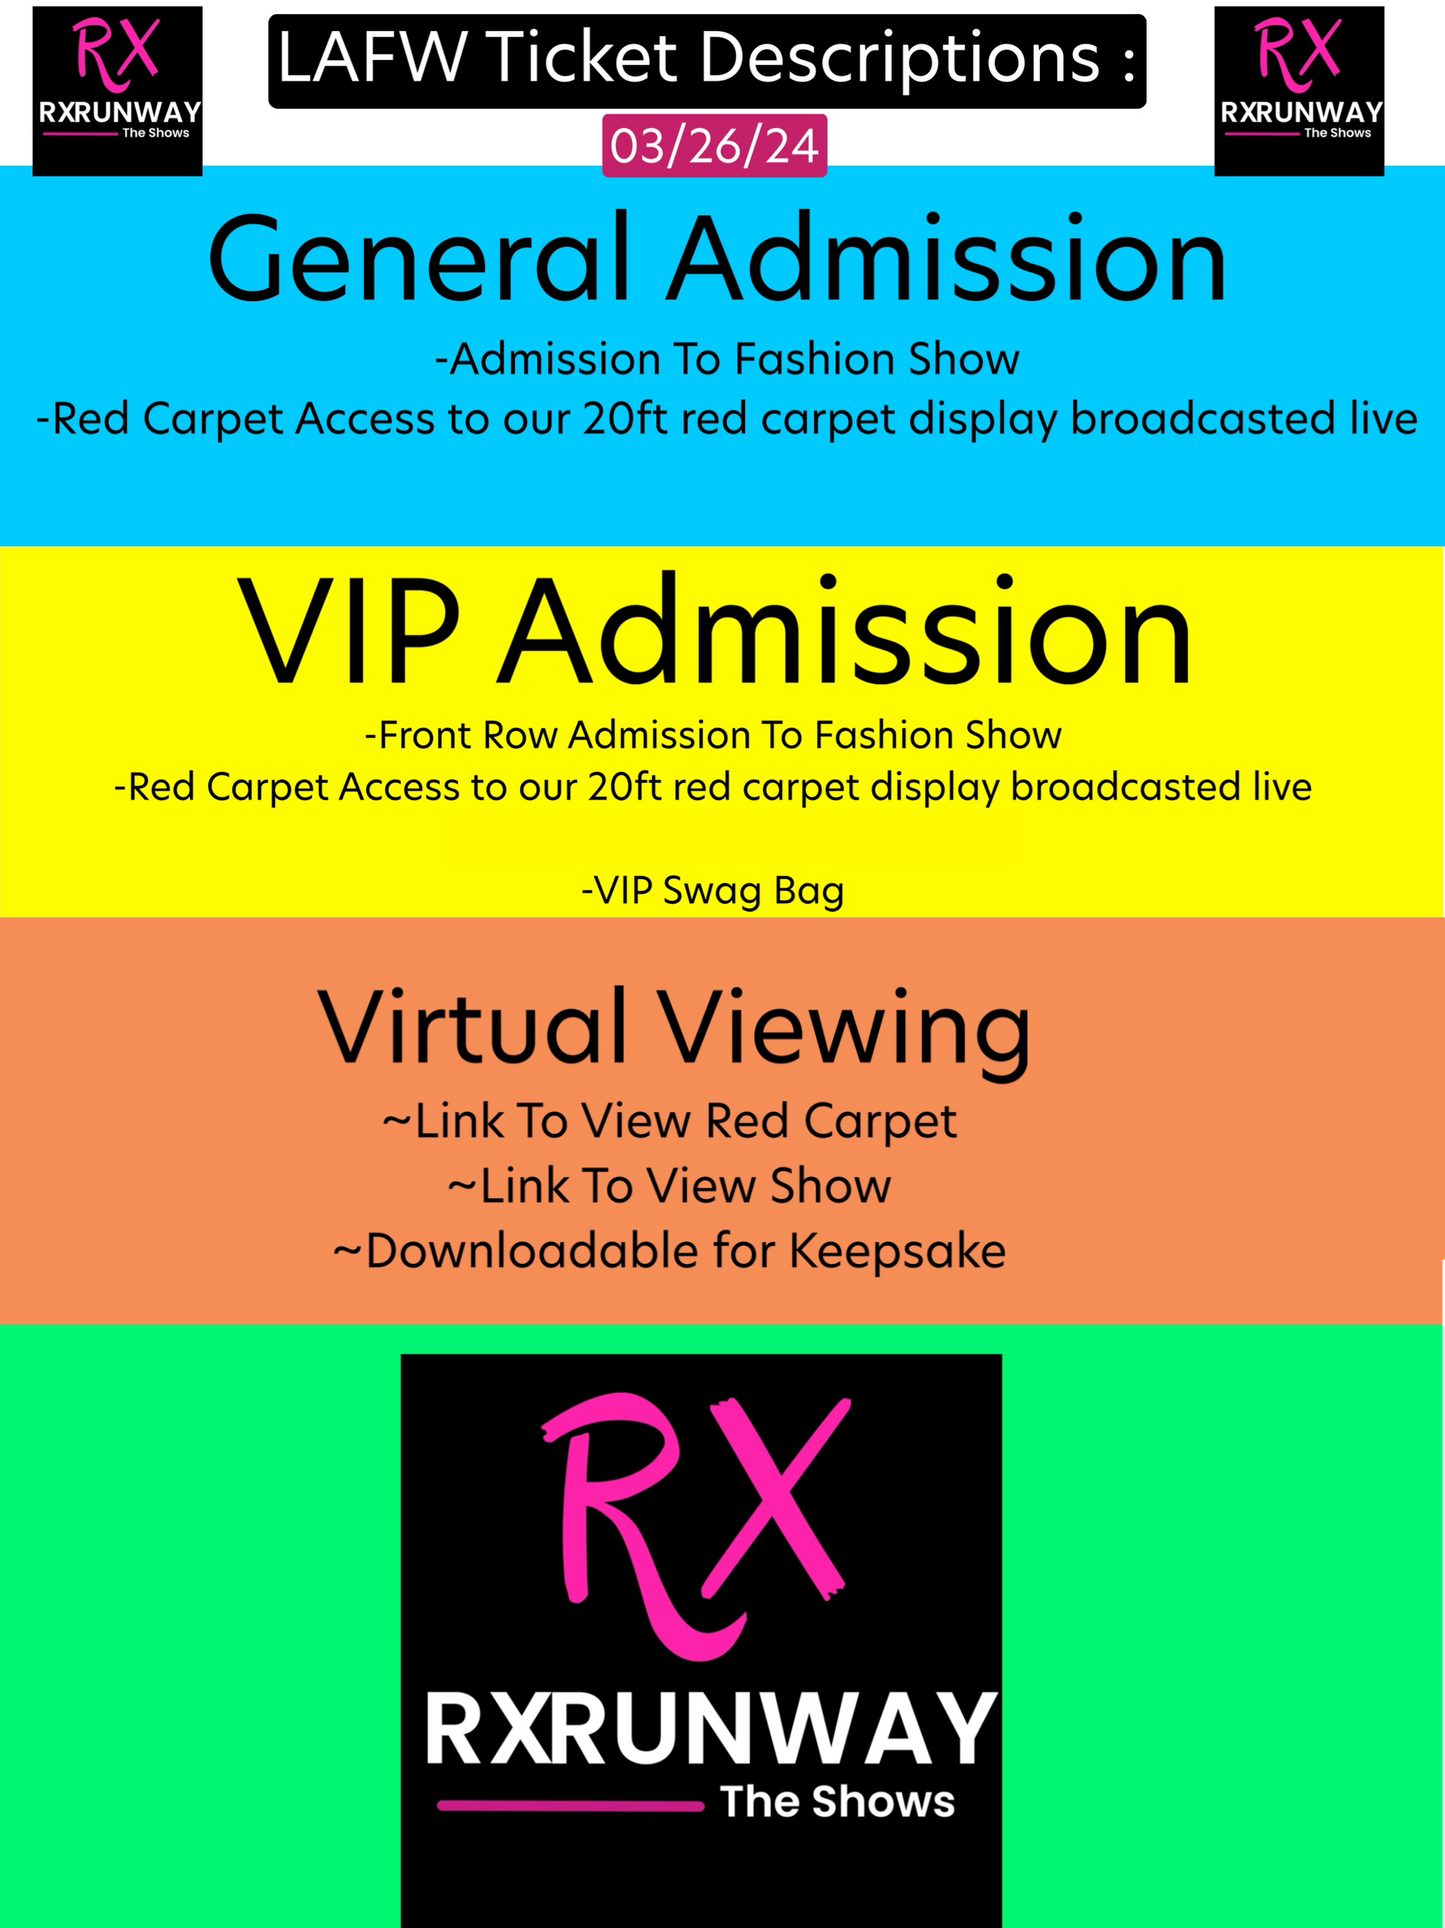 General Admission For Red Carpet & Fashion Show: LAFW 03/26/24